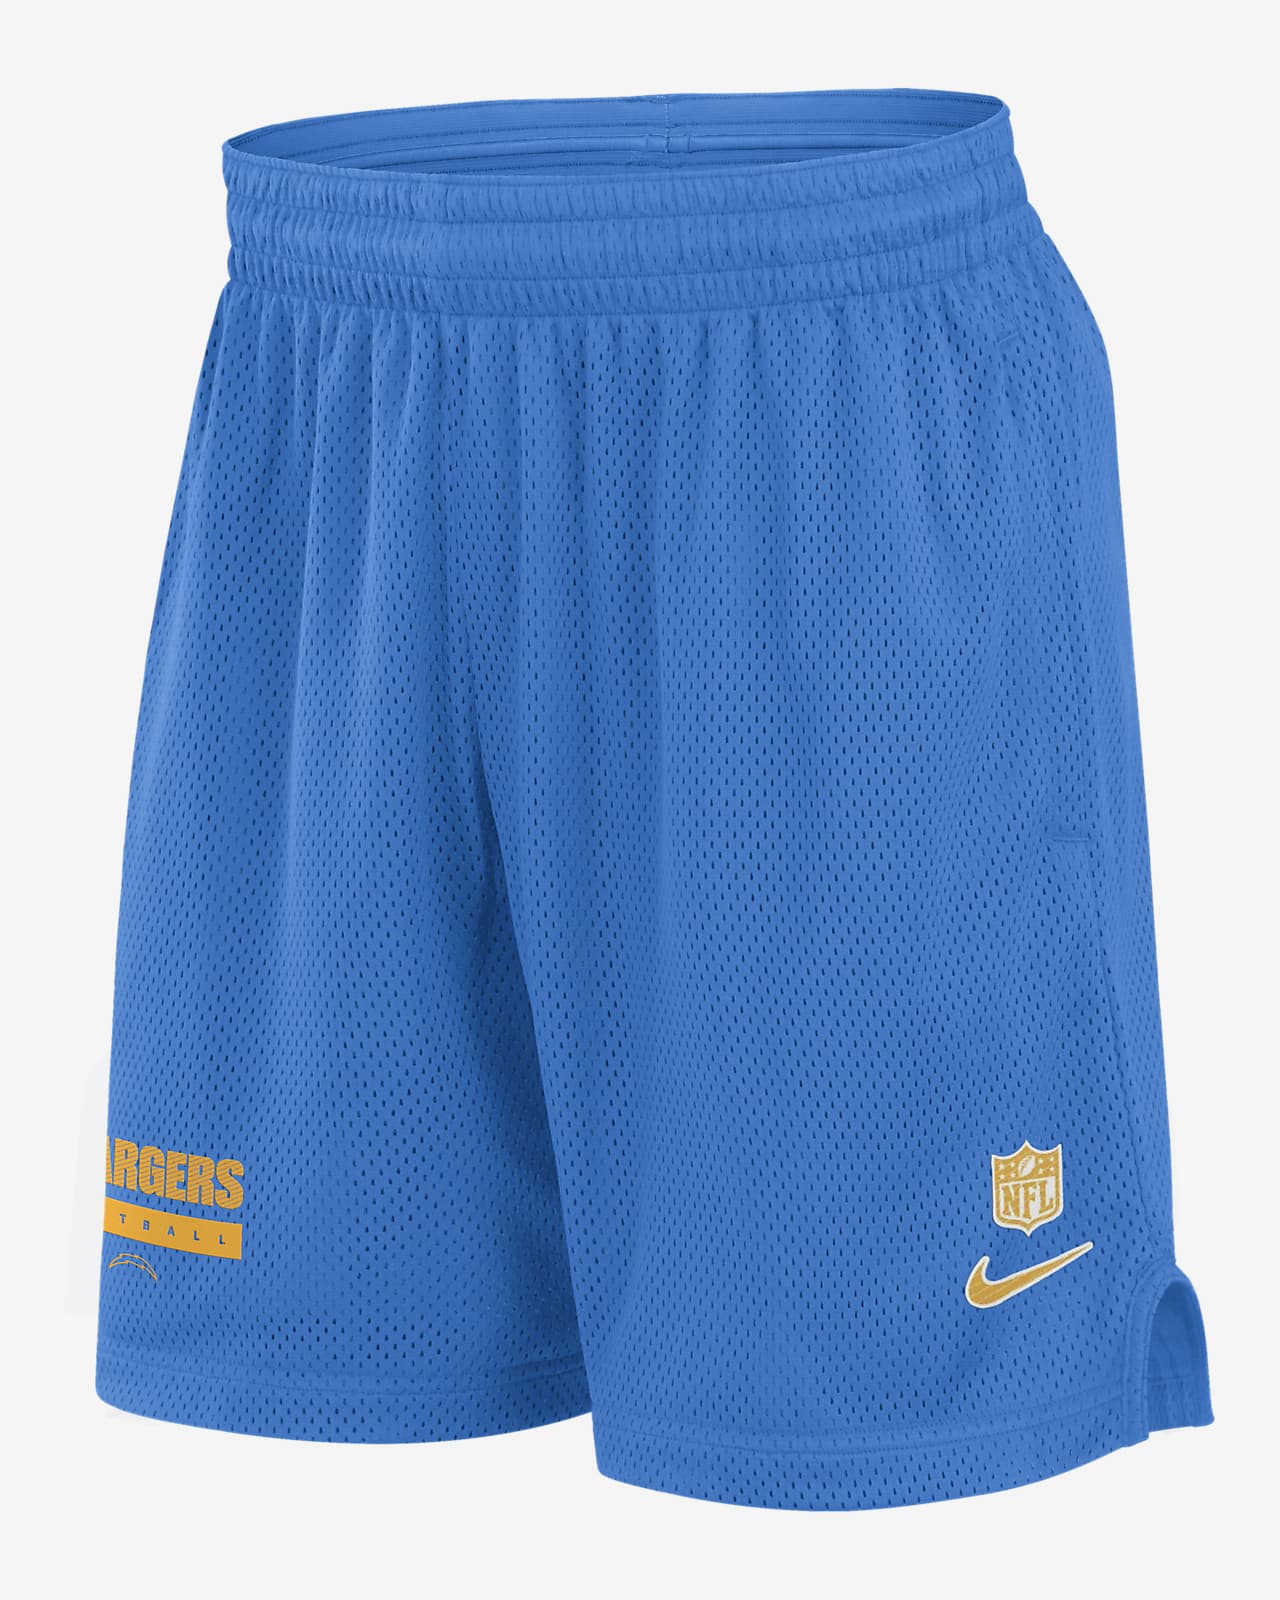 Los Angeles Chargers Sideline Men's Nike Dri-FIT NFL Shorts